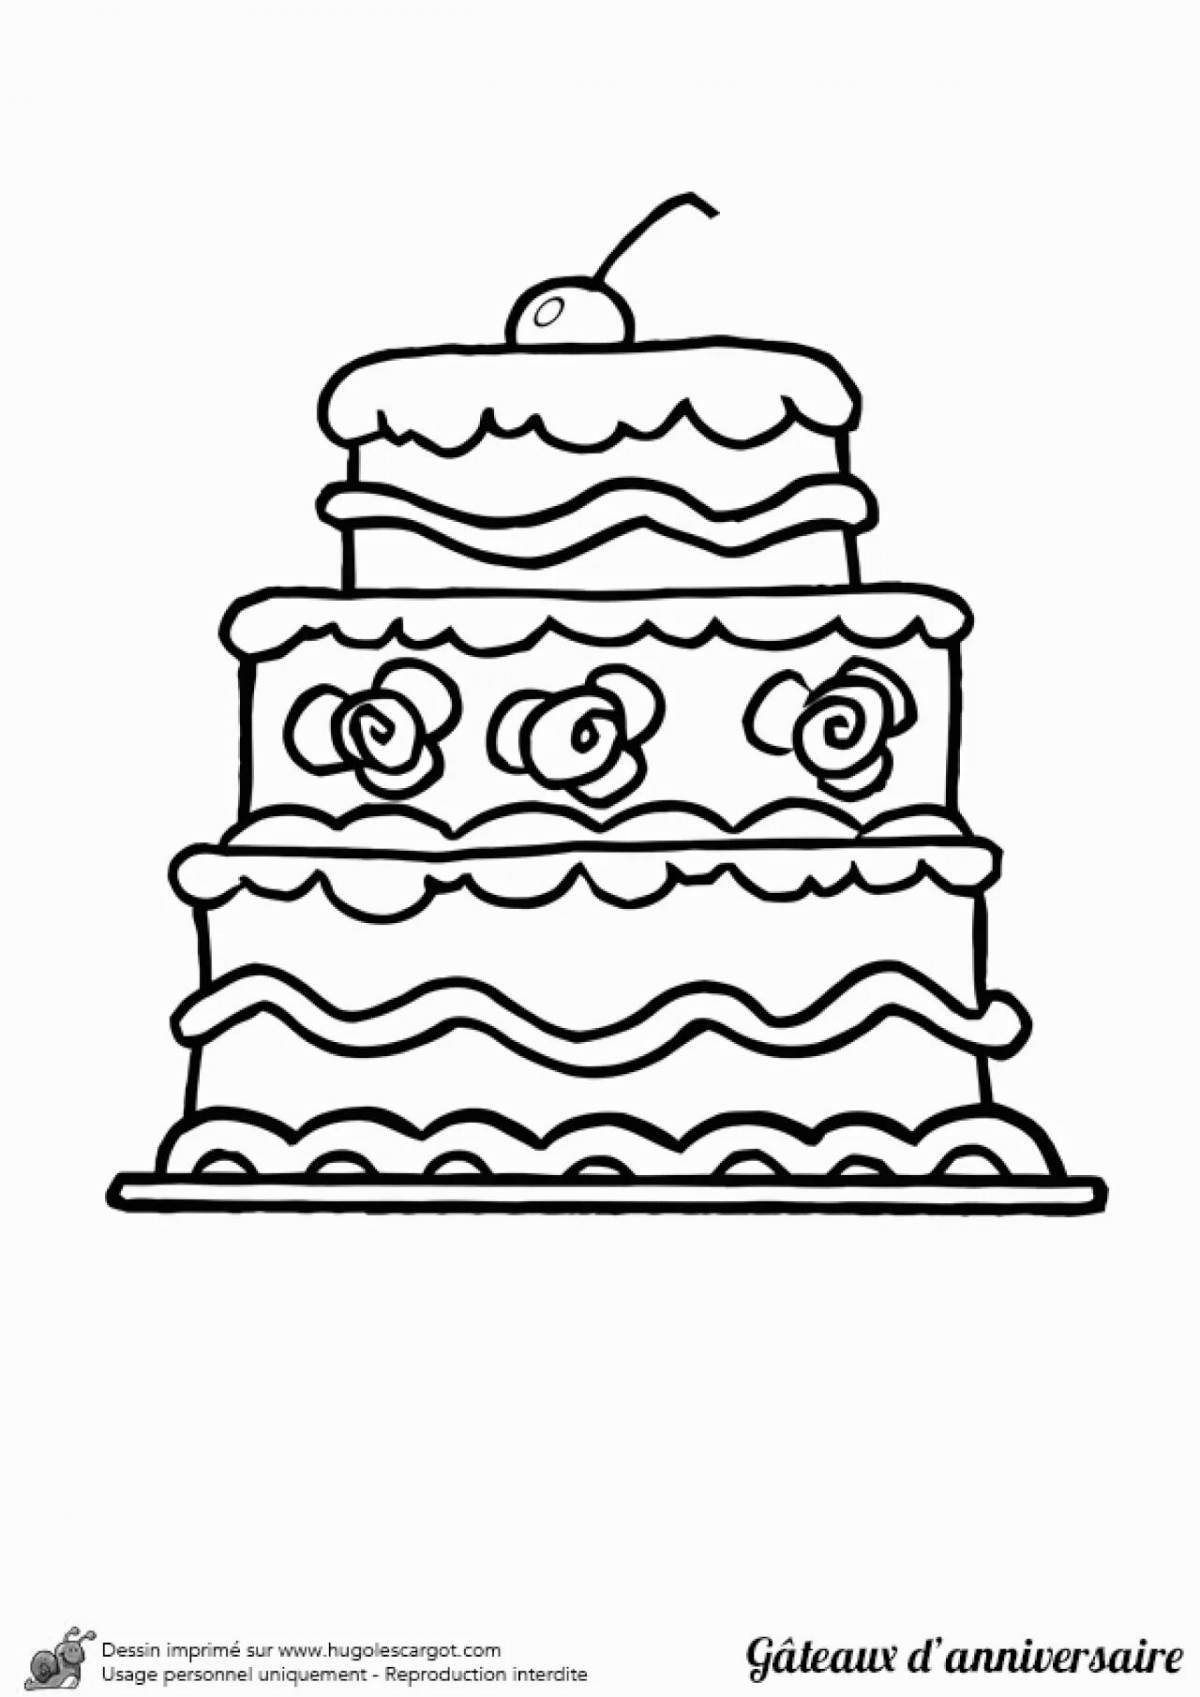 Cake drawing for kids #3